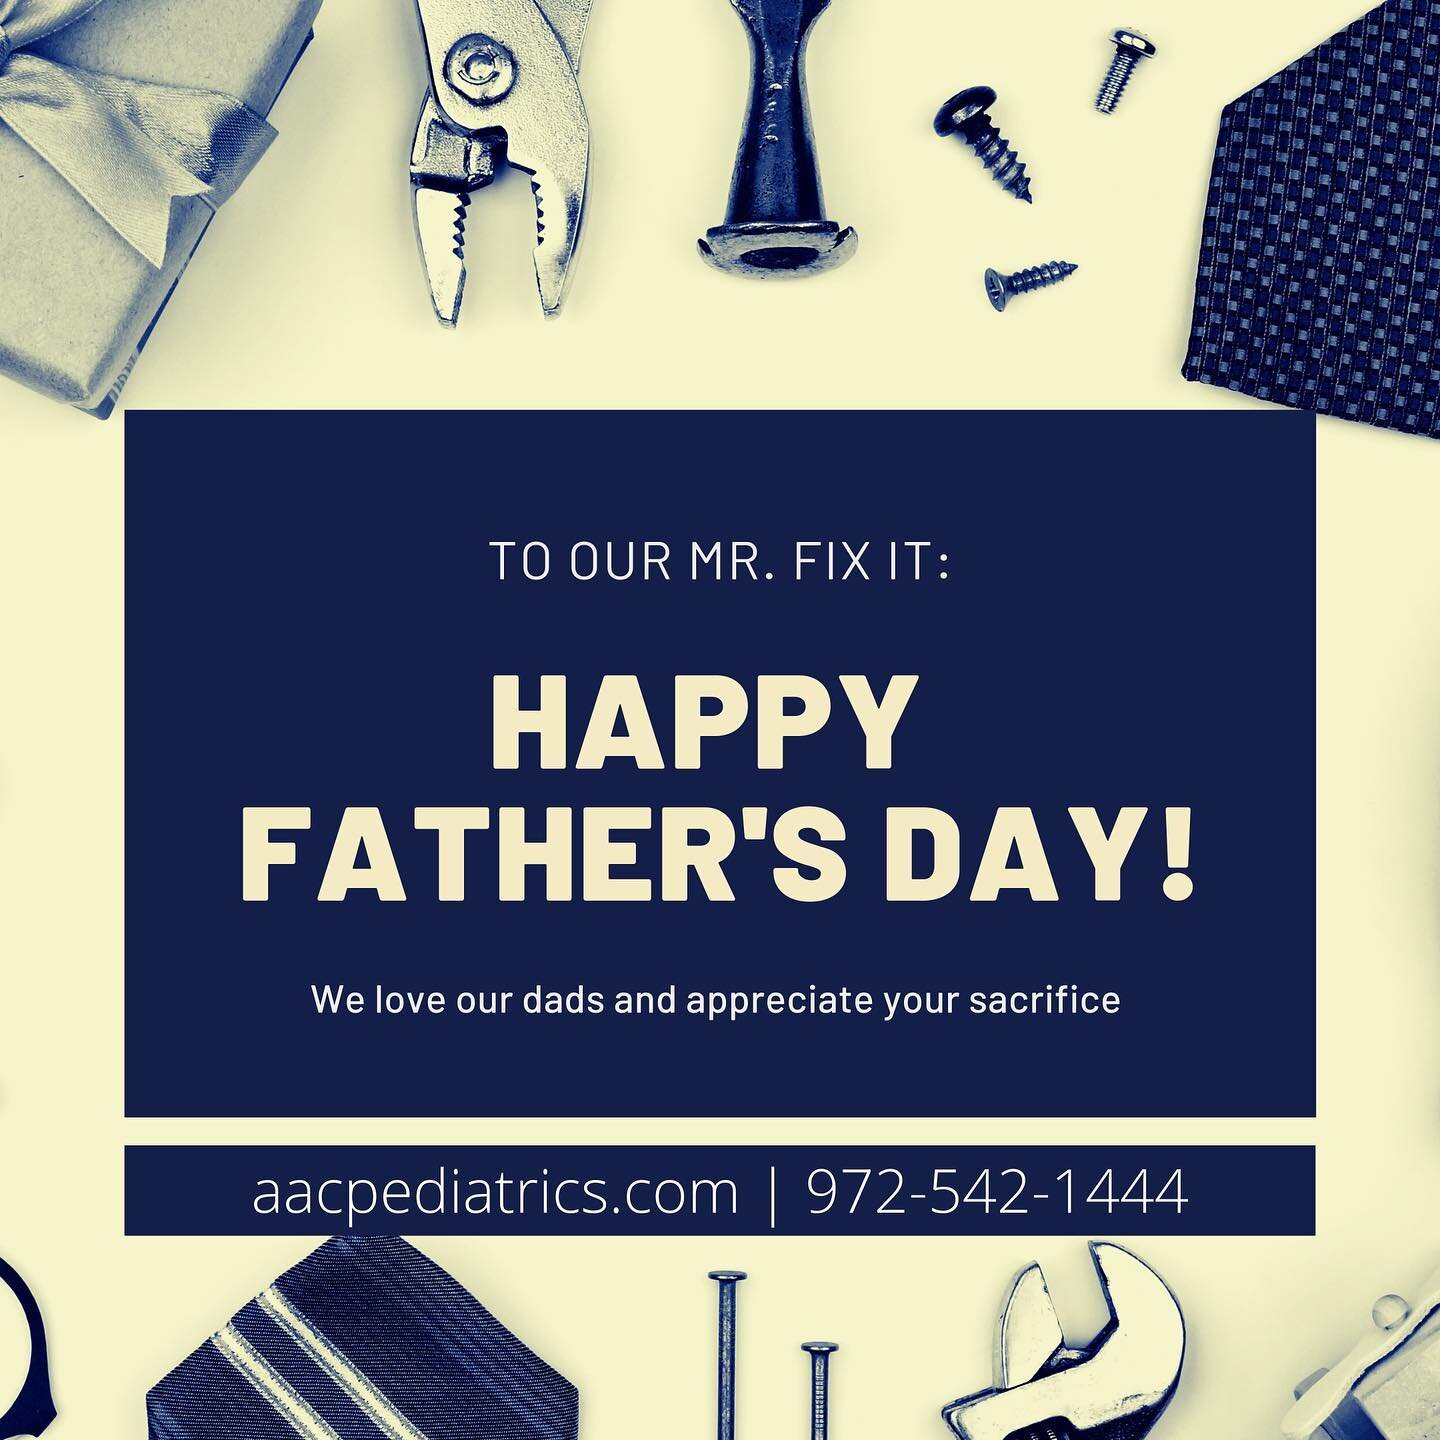 ❤️❤️❤️ Happy Father&rsquo;s Day from all of us at All About Children Pediatrics!